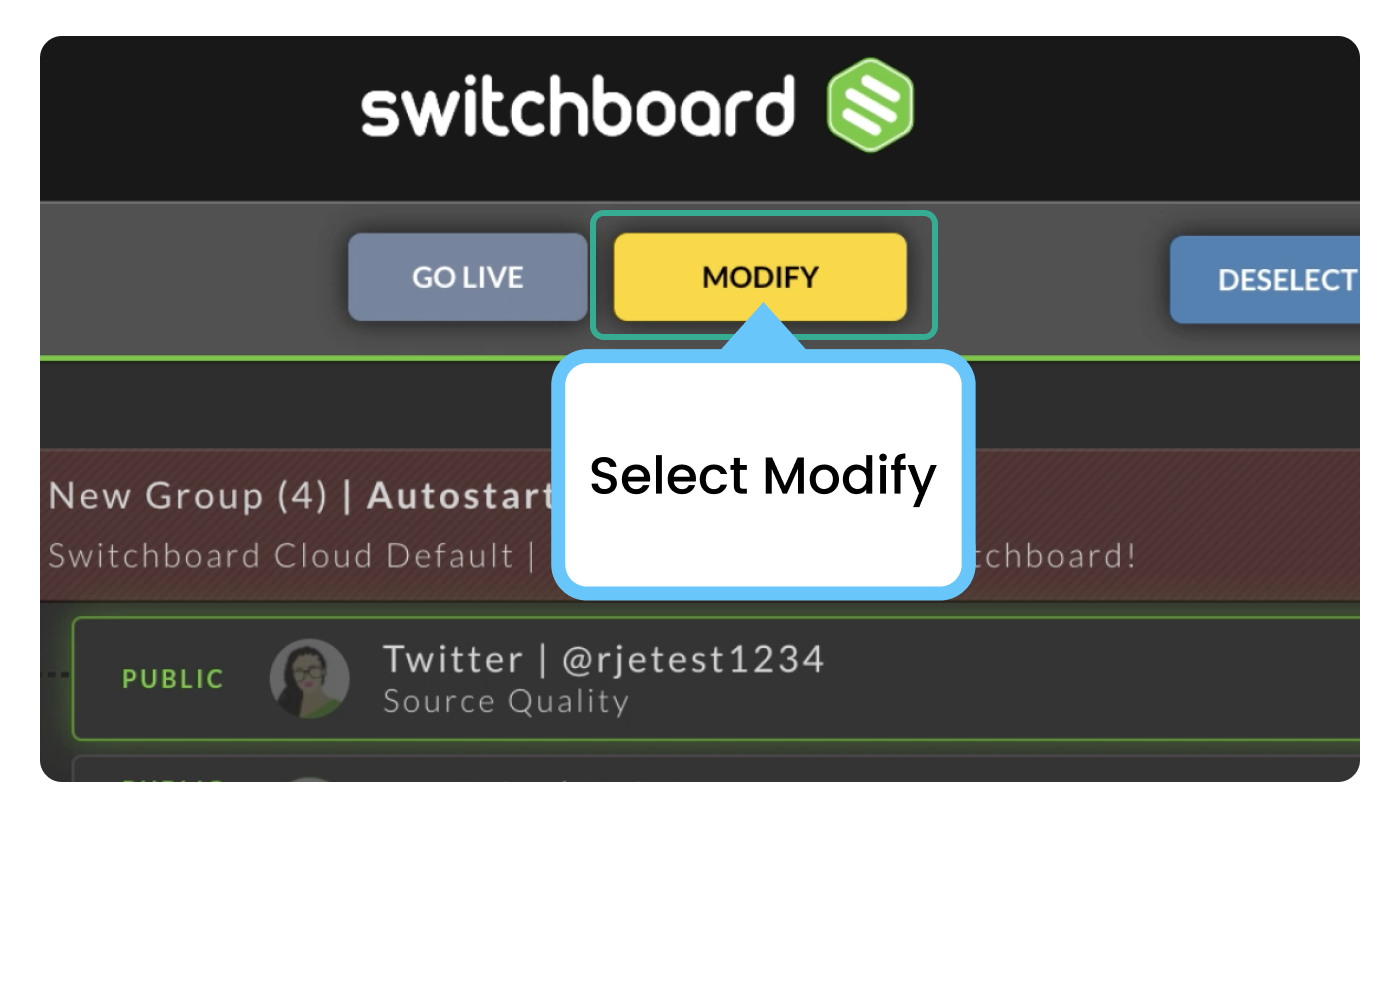 Movedestination-btwn-workflows-switchboardlive-howto 3.png